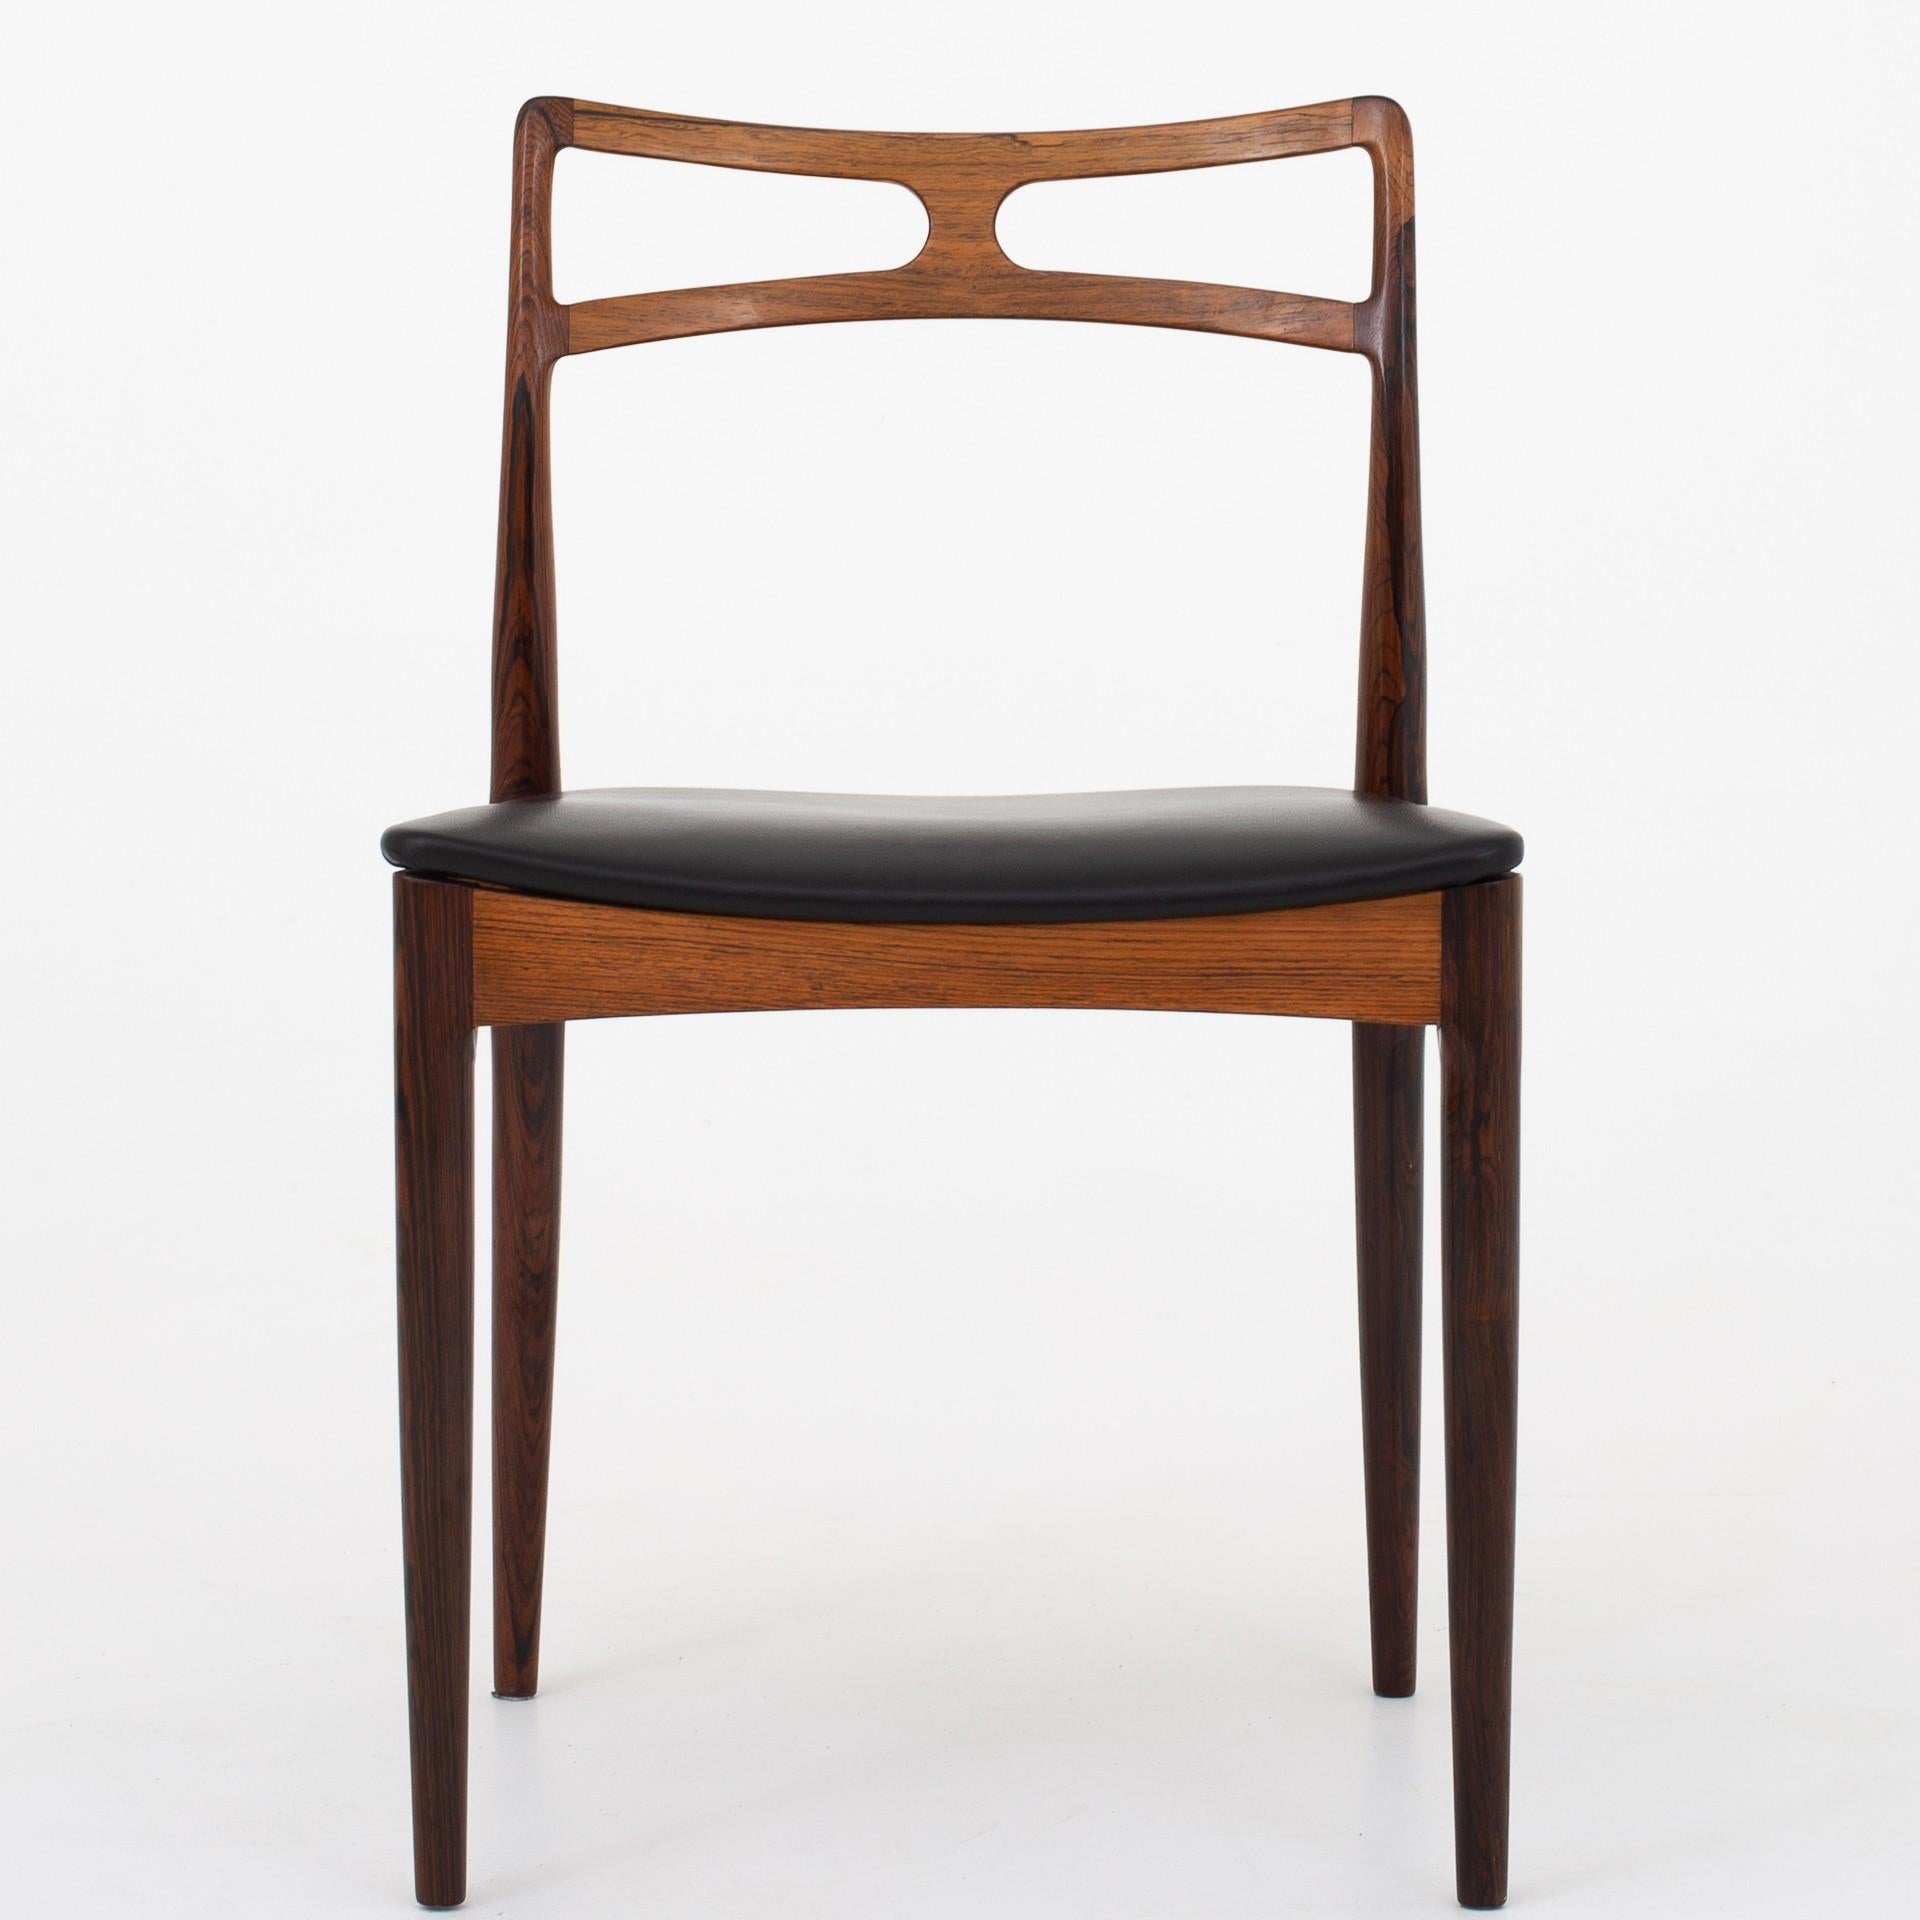 Large set with 12 dining chair in rosewood with black leather. Maker Christian Linneberg.